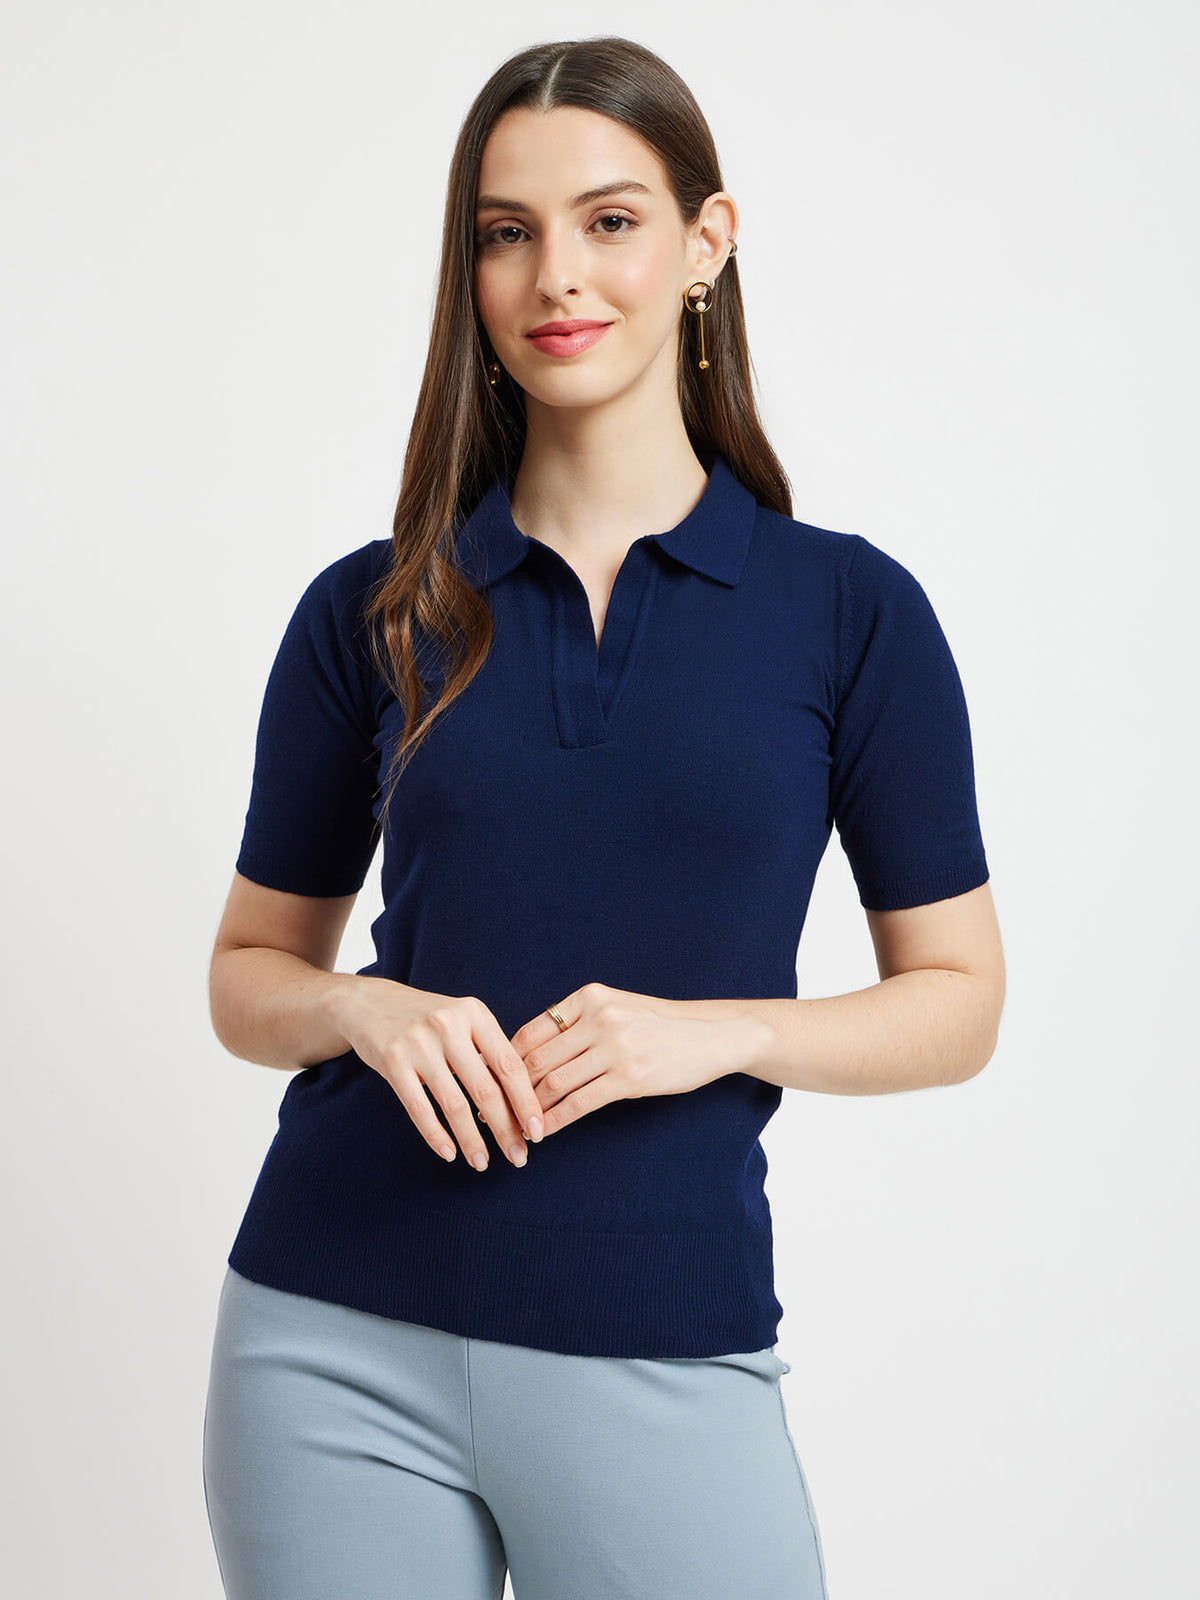 LivSoft Collared Knitted Top - Navy Blue